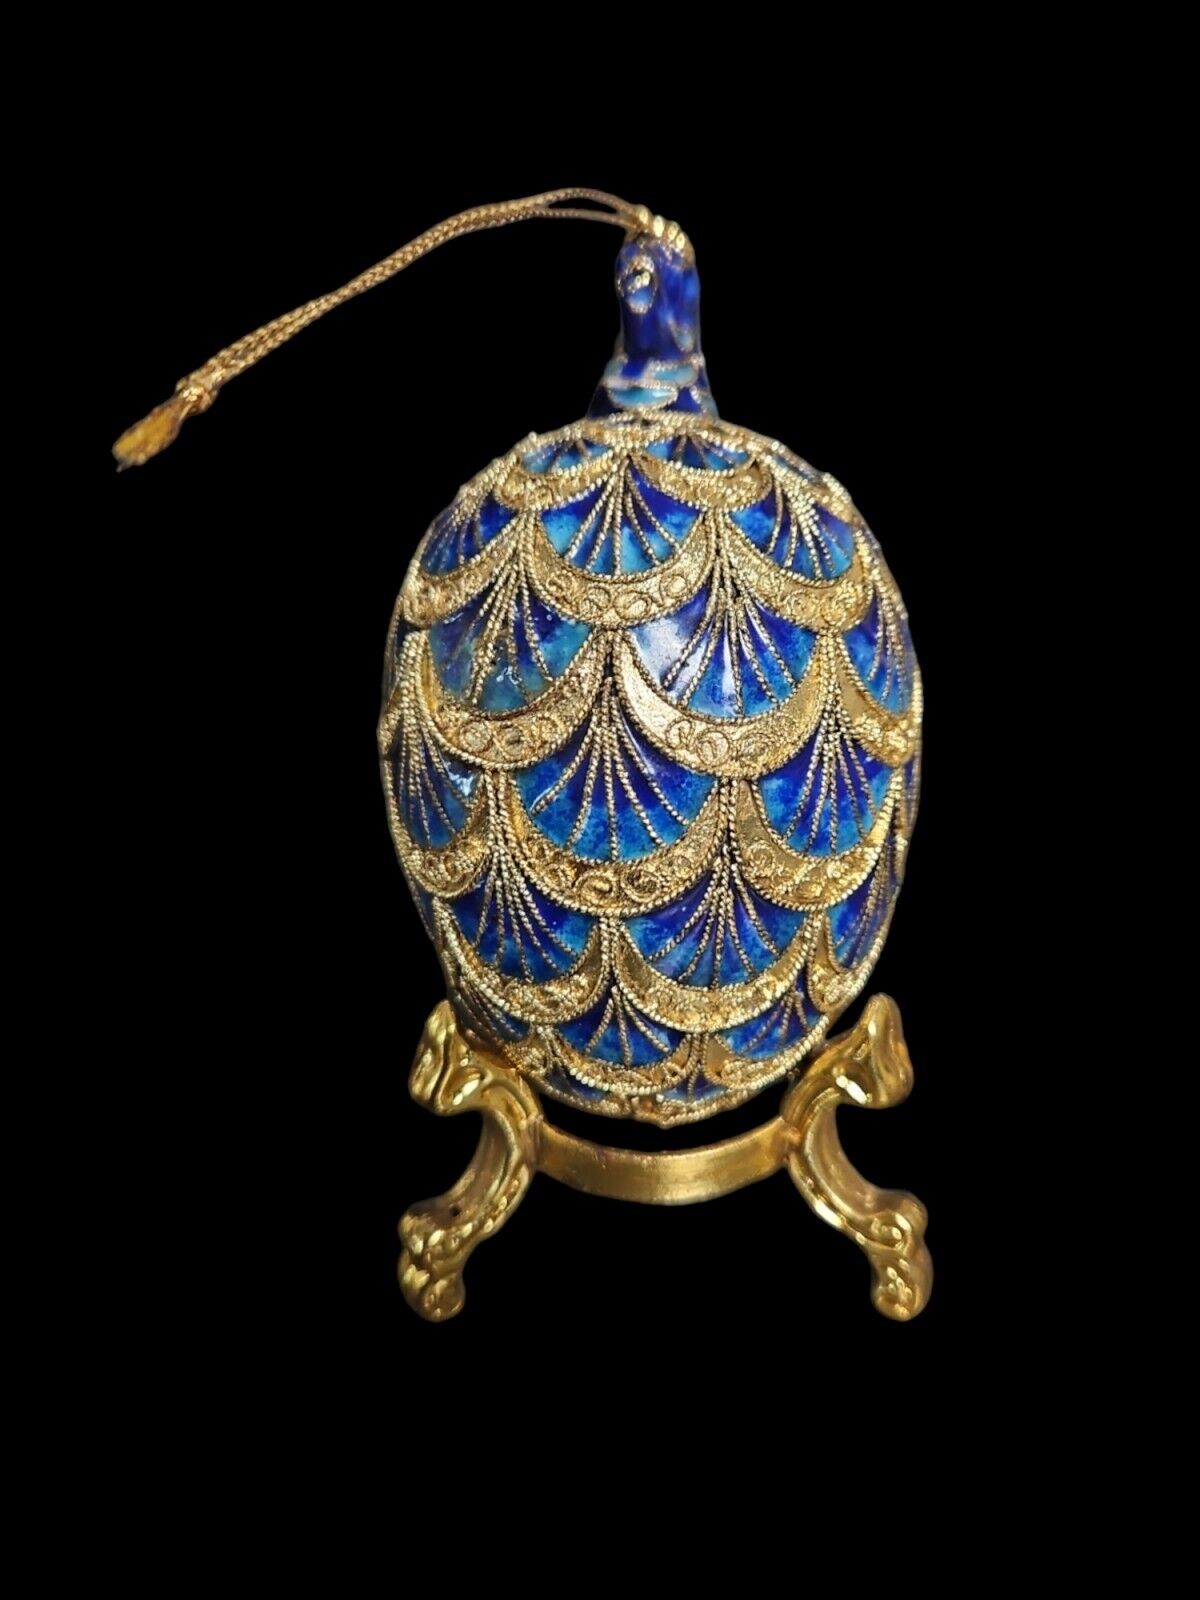 Cloisonne Faberge Inspired Egg Christmas Ornament w/ Stand~Cobalt Blue & Gold